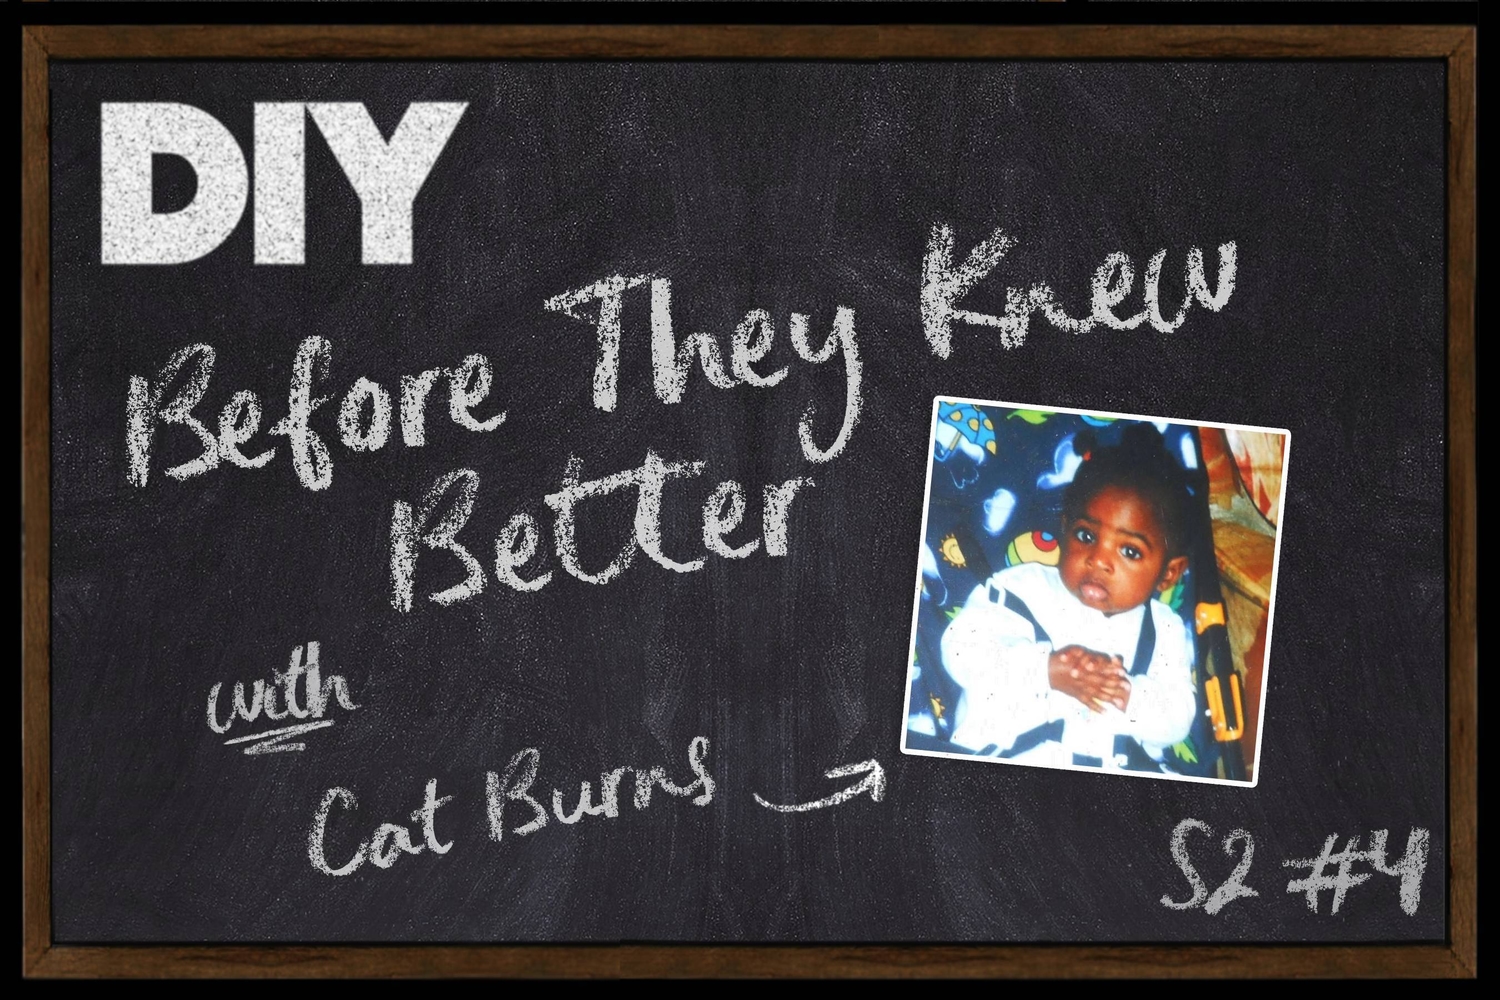 Cat Burns chats Ed Sheeran, sisterhood, and living with autism on DIY magazine's Before They Knew Better podcast